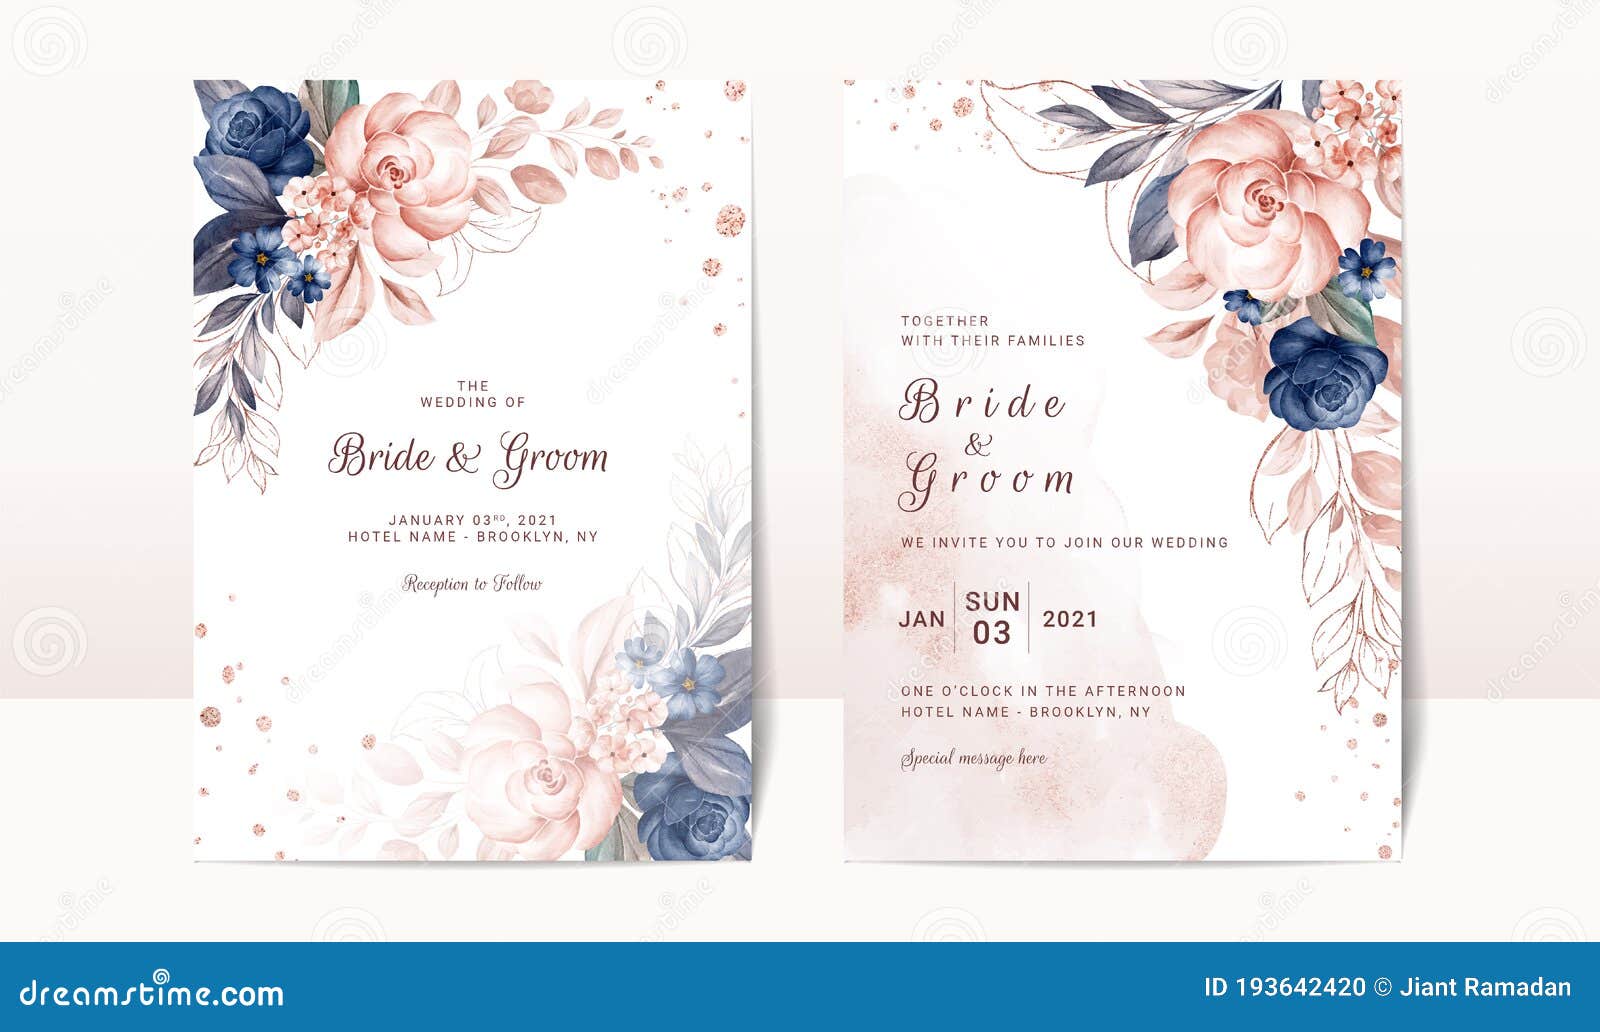 10 Wedding Invitations Day/Evening Blue Floral Watercolour Rose Leaves 